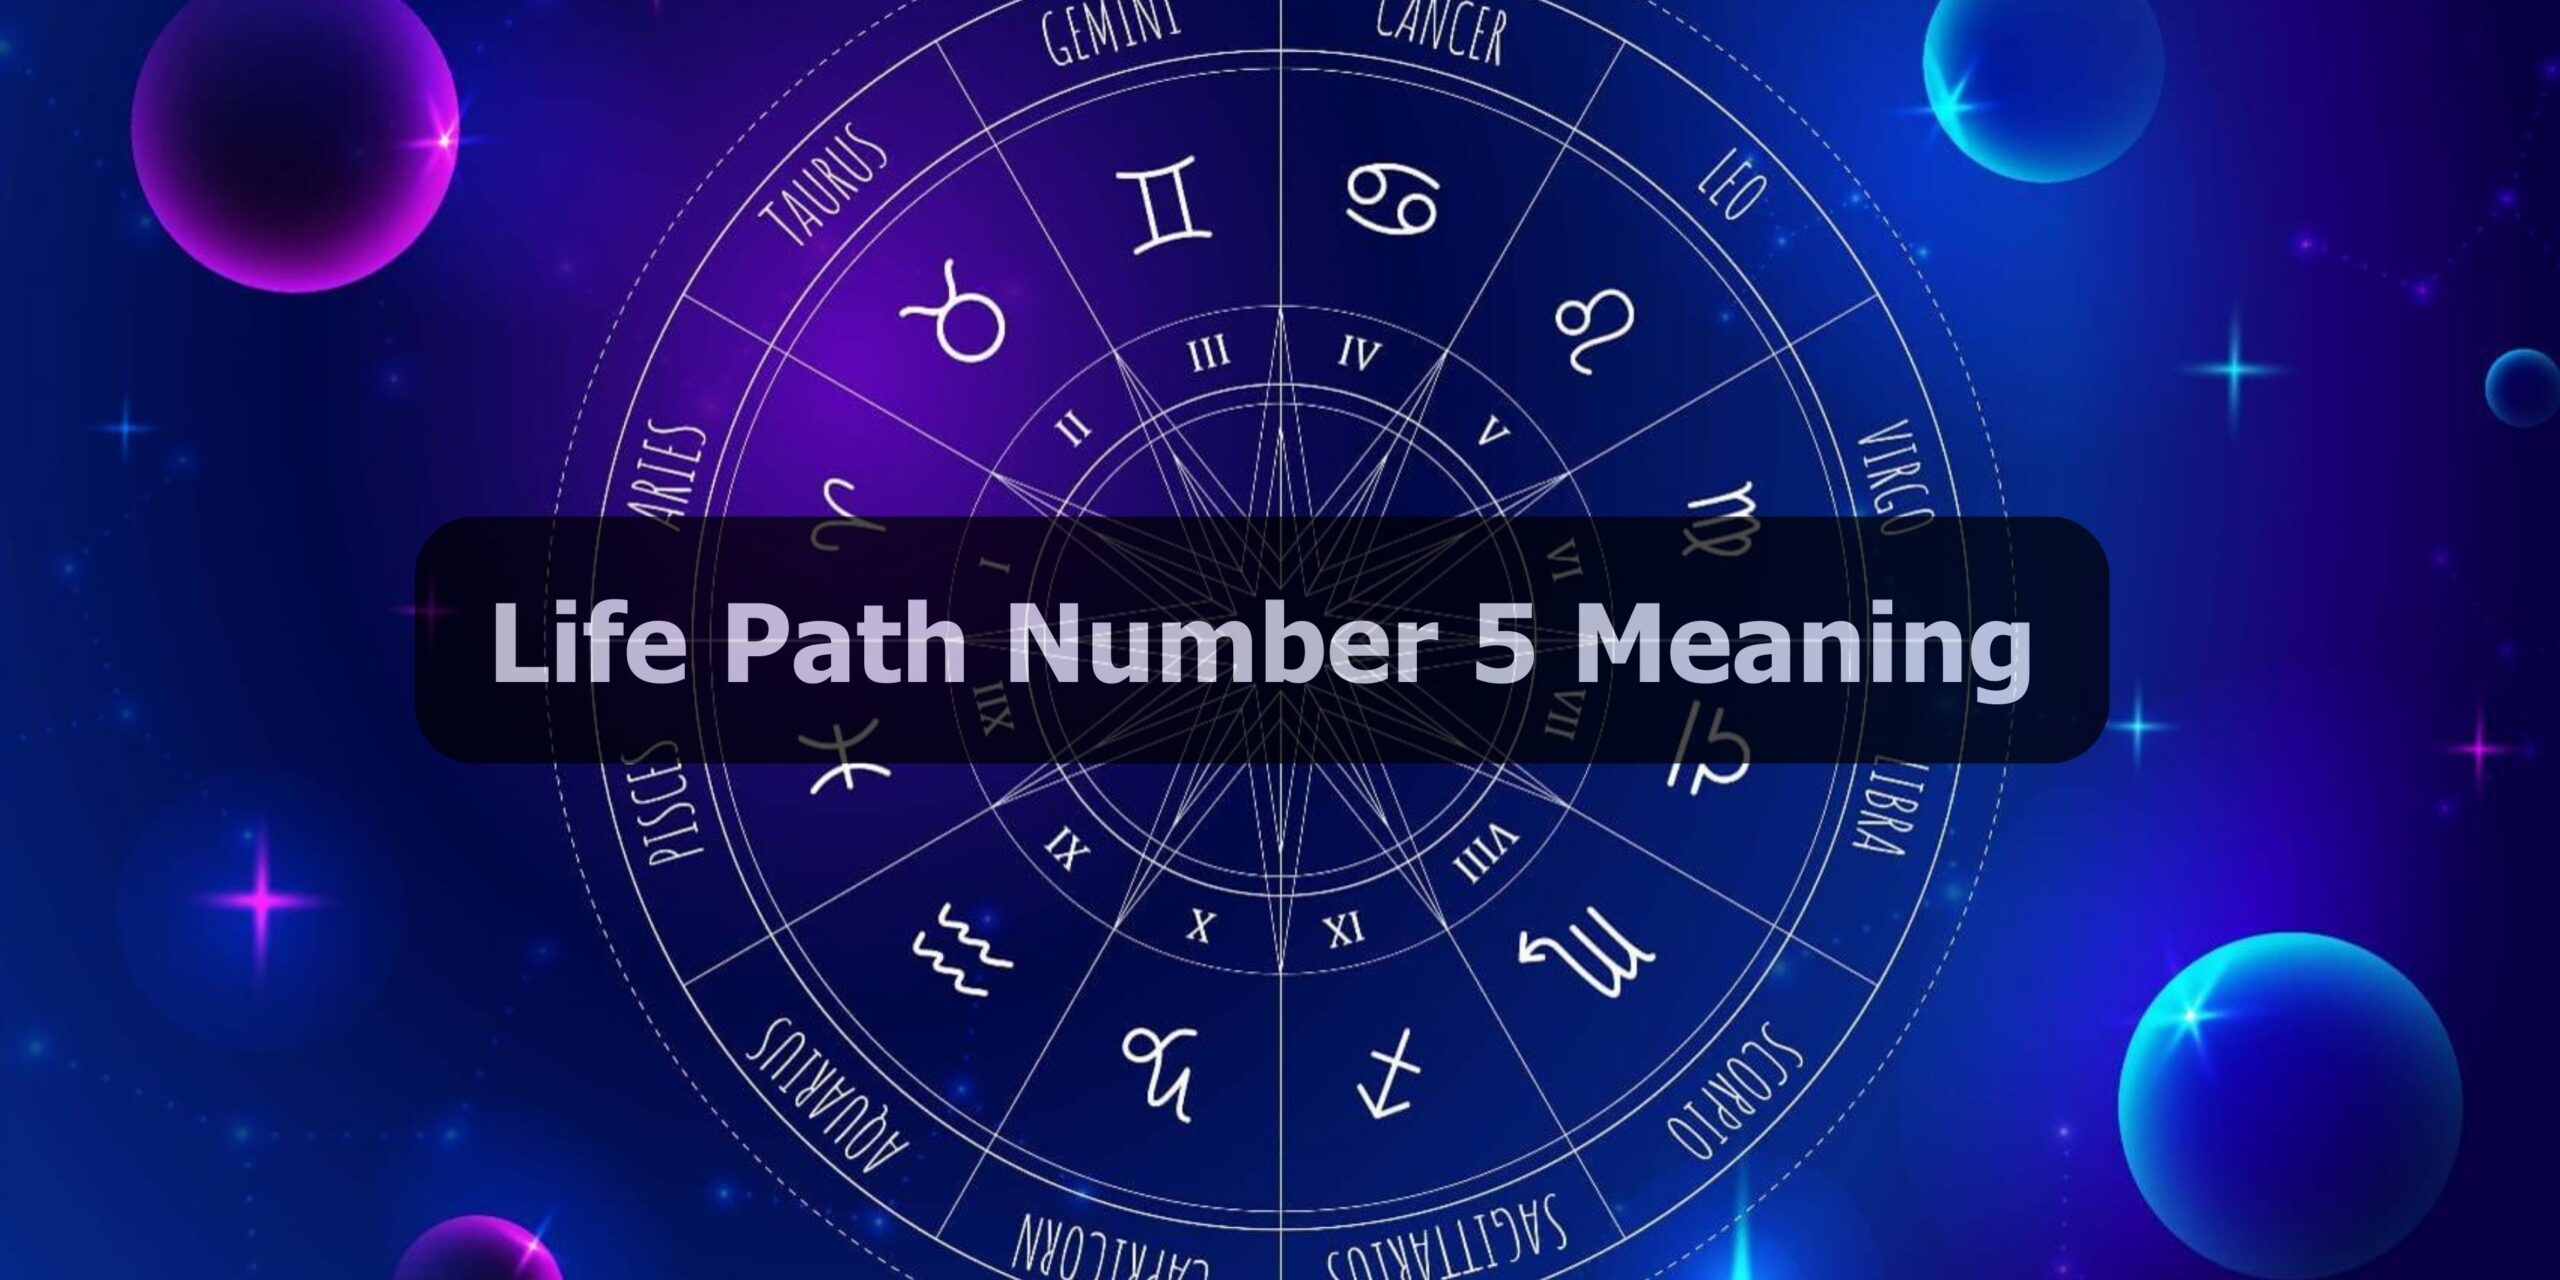 What Does 5 Mean in Numerology